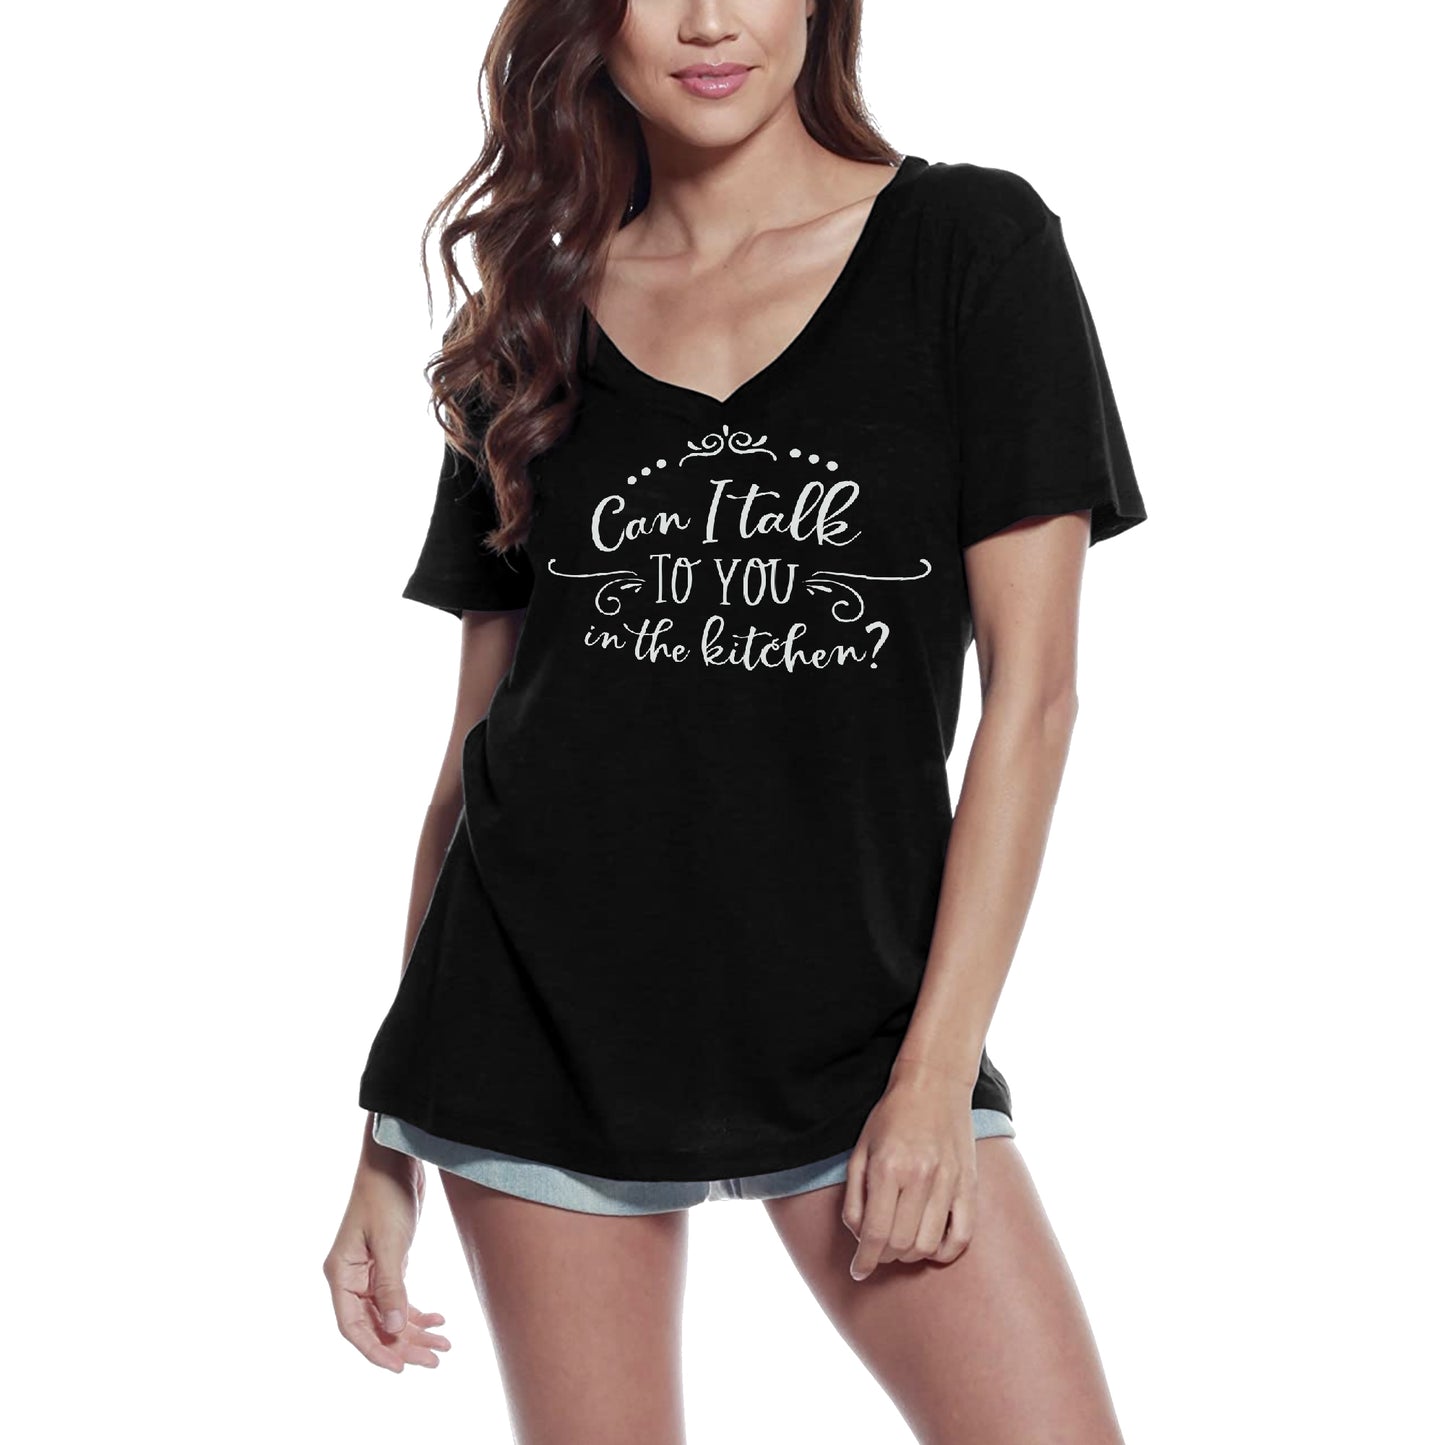 ULTRABASIC Women's T-Shirt Can I Talk to You in the Kitchen - Short Sleeve Tee Shirt Tops